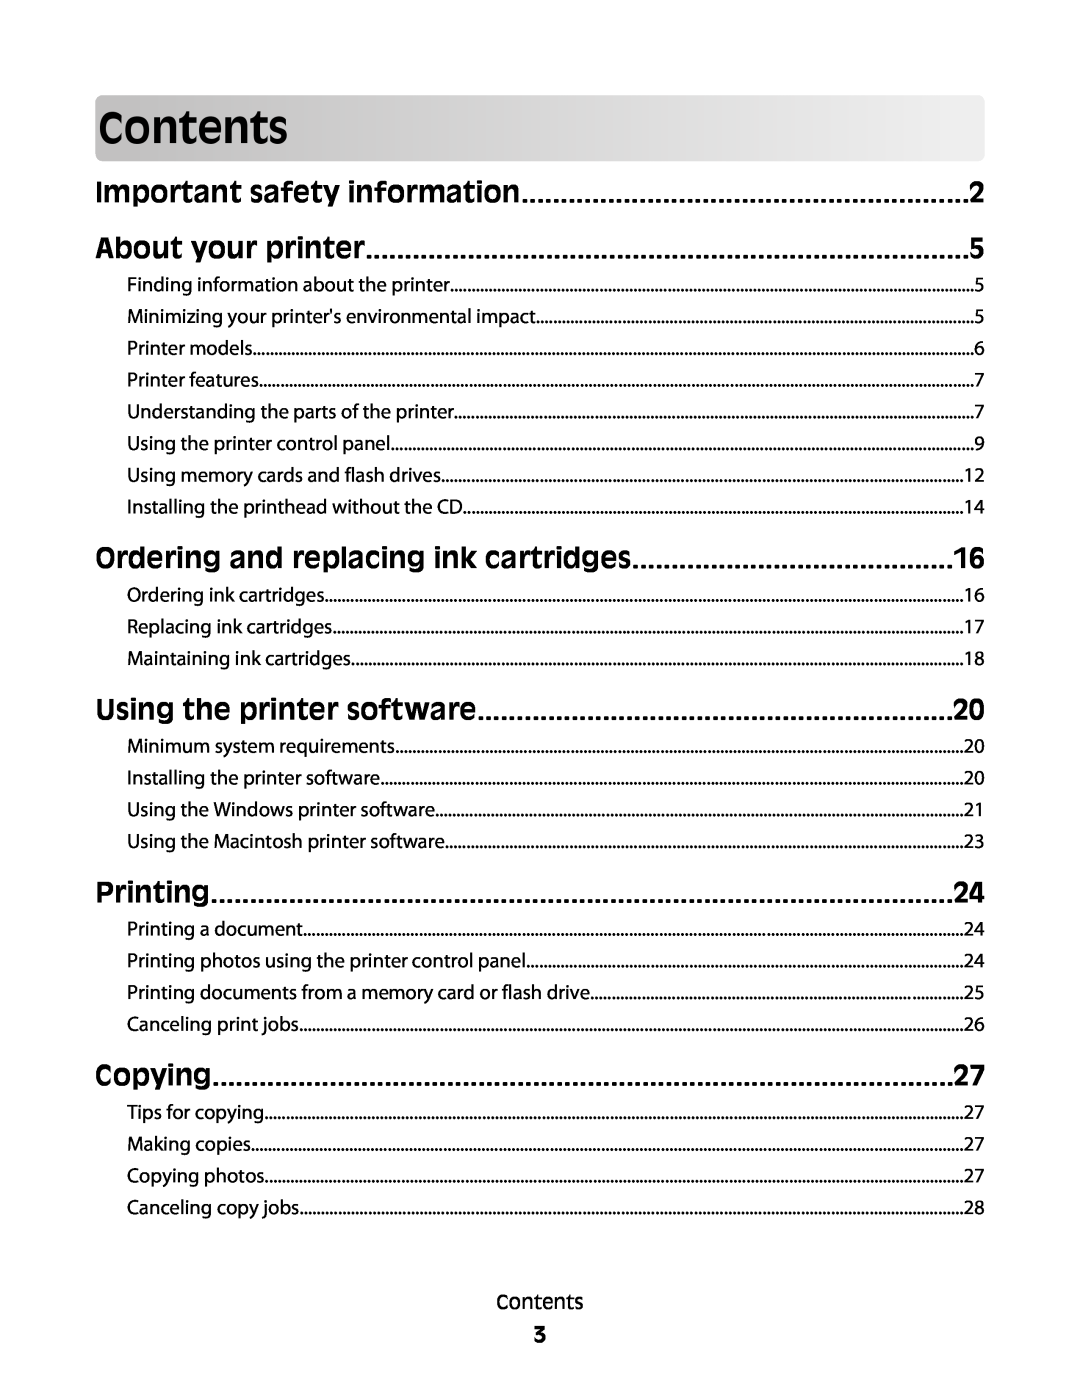 Lexmark S400 Contents, Important safety information, About your printer, Ordering and replacing ink cartridges, Printing 